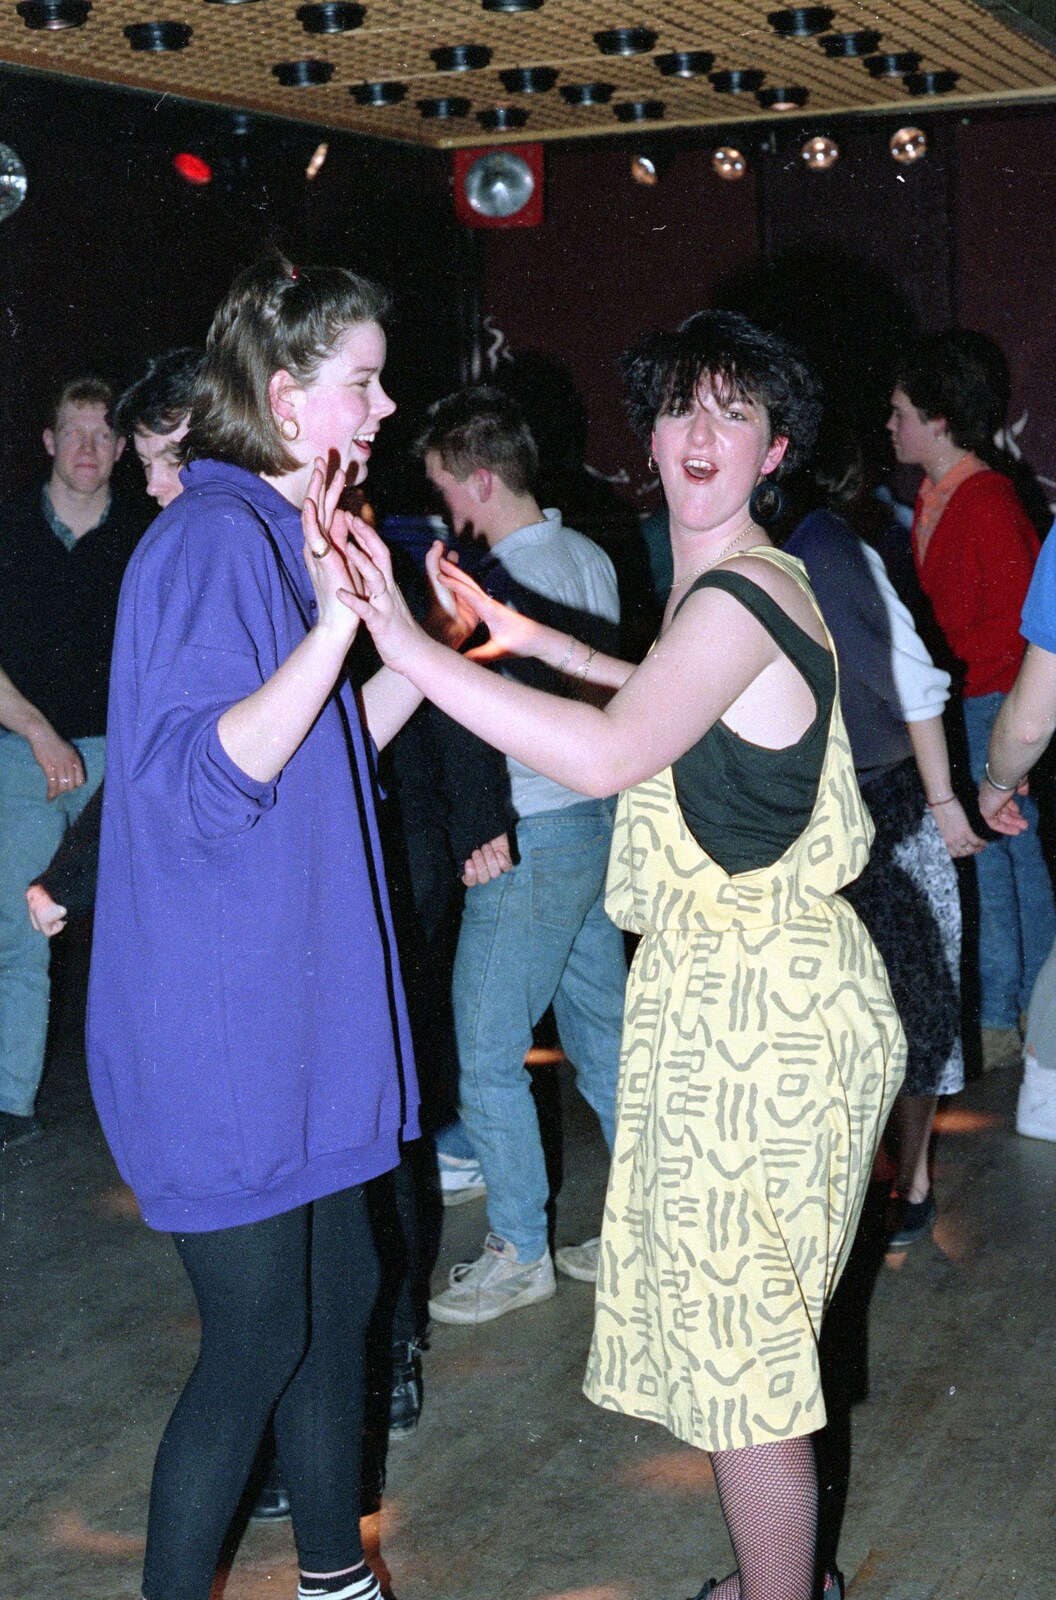 The party's protagonist, in the yellow dress from Uni: A Party in Snobs Nightclub, Mayflower Street, Plymouth - 18th October 1986